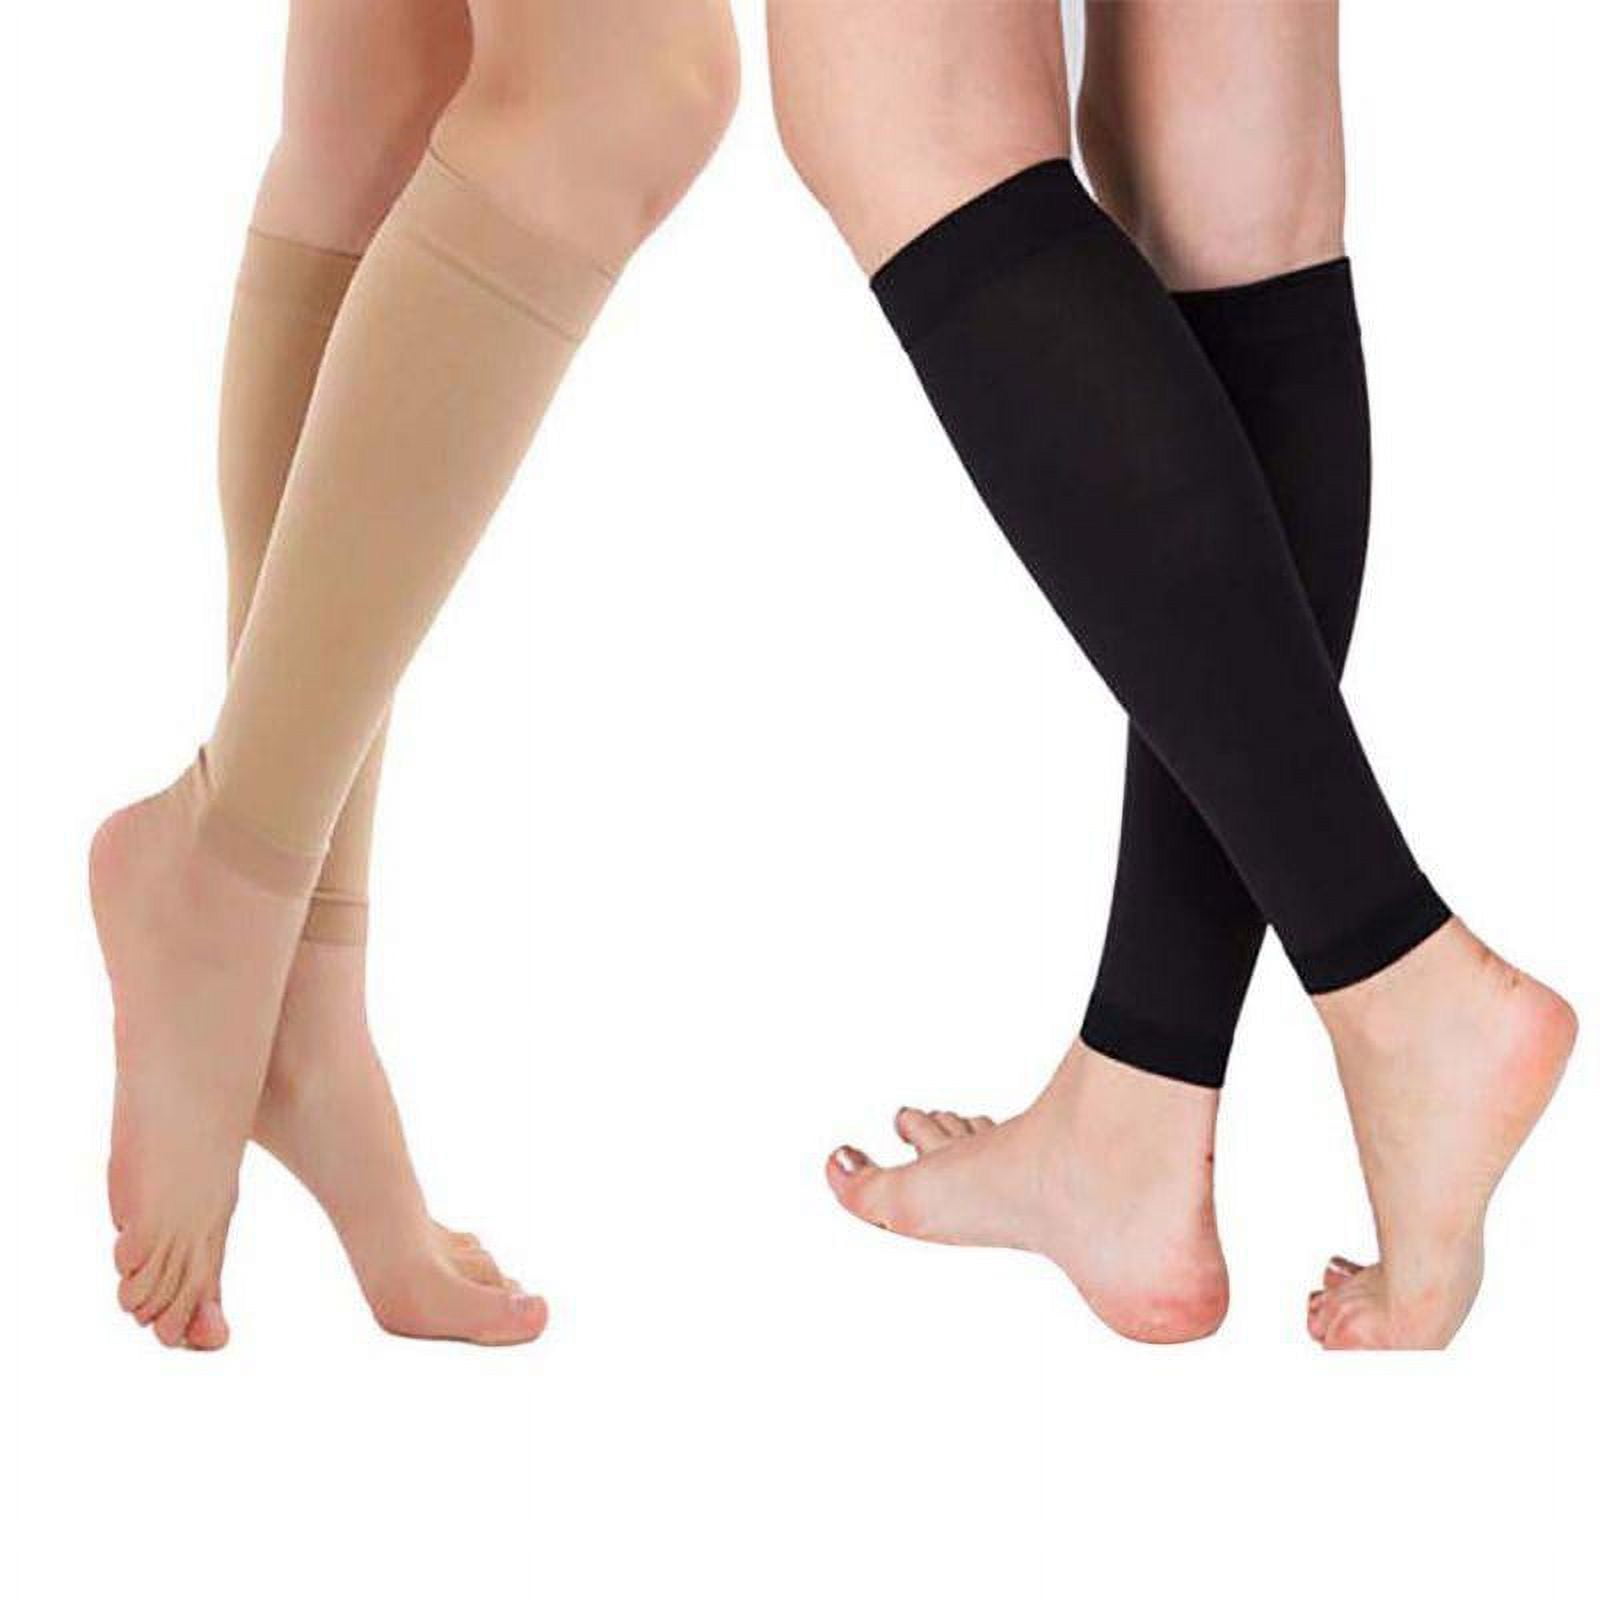  VARCOH Compression Socks for Women, Compression Leggings for  Women, Medical Compression Stockings Best for DVT, Pregnancy, Varicose  Veins, Relief Shin Splints, Edema : Clothing, Shoes & Jewelry